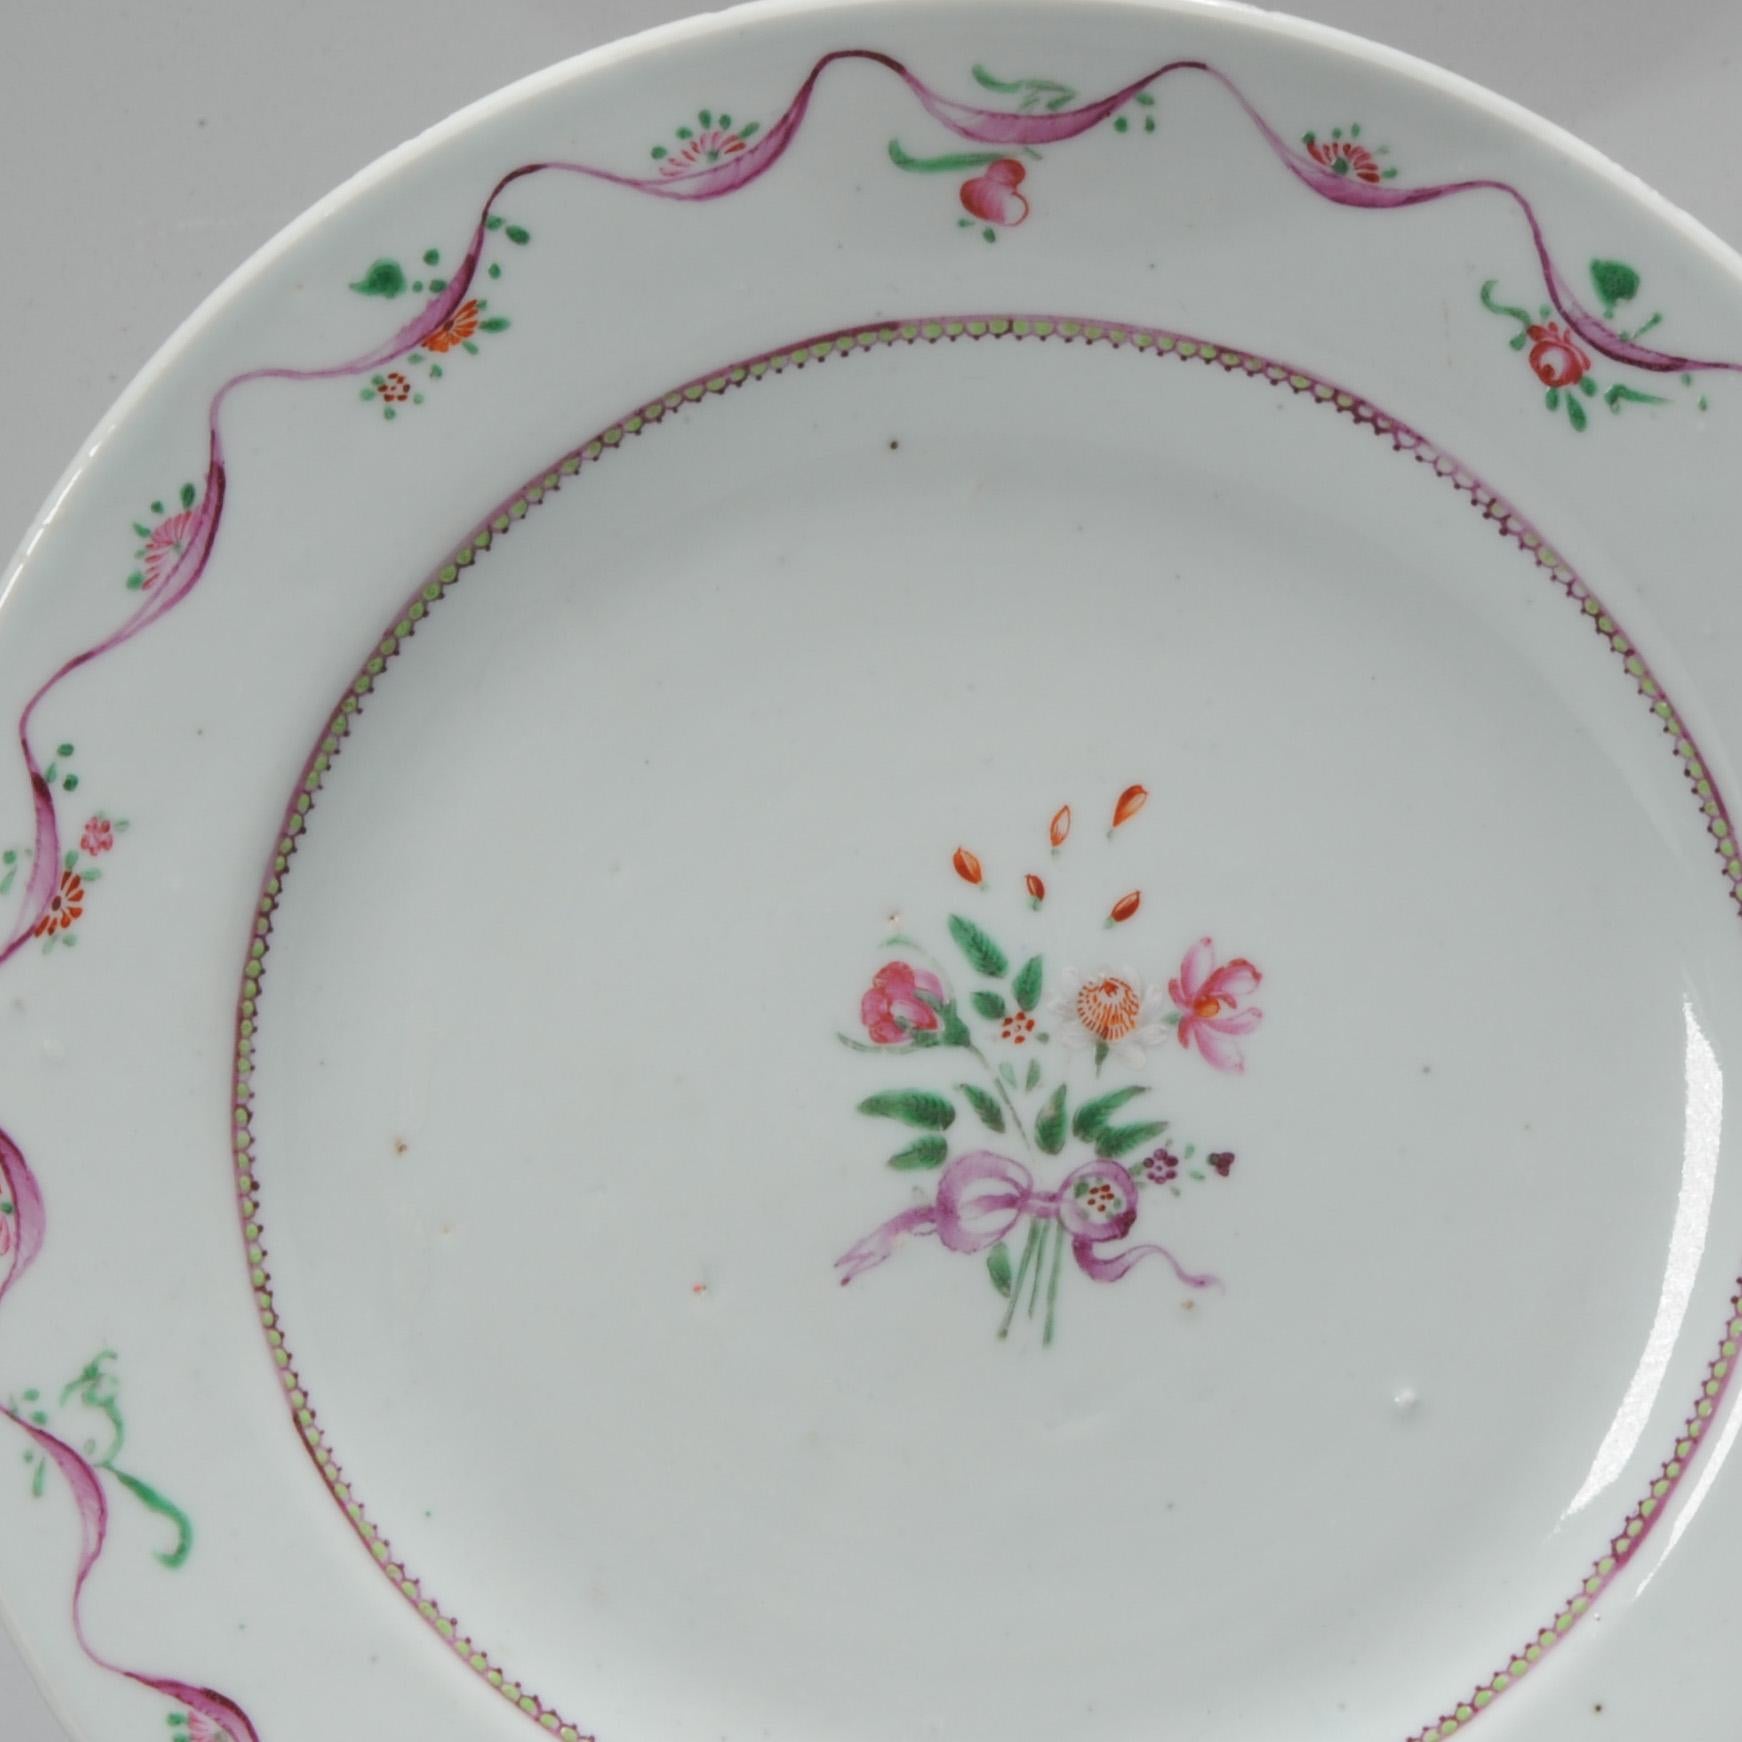 Antique Chinese Porcelain Famille Rose Dish with Flowers, 18th Century In Good Condition For Sale In Amsterdam, Noord Holland